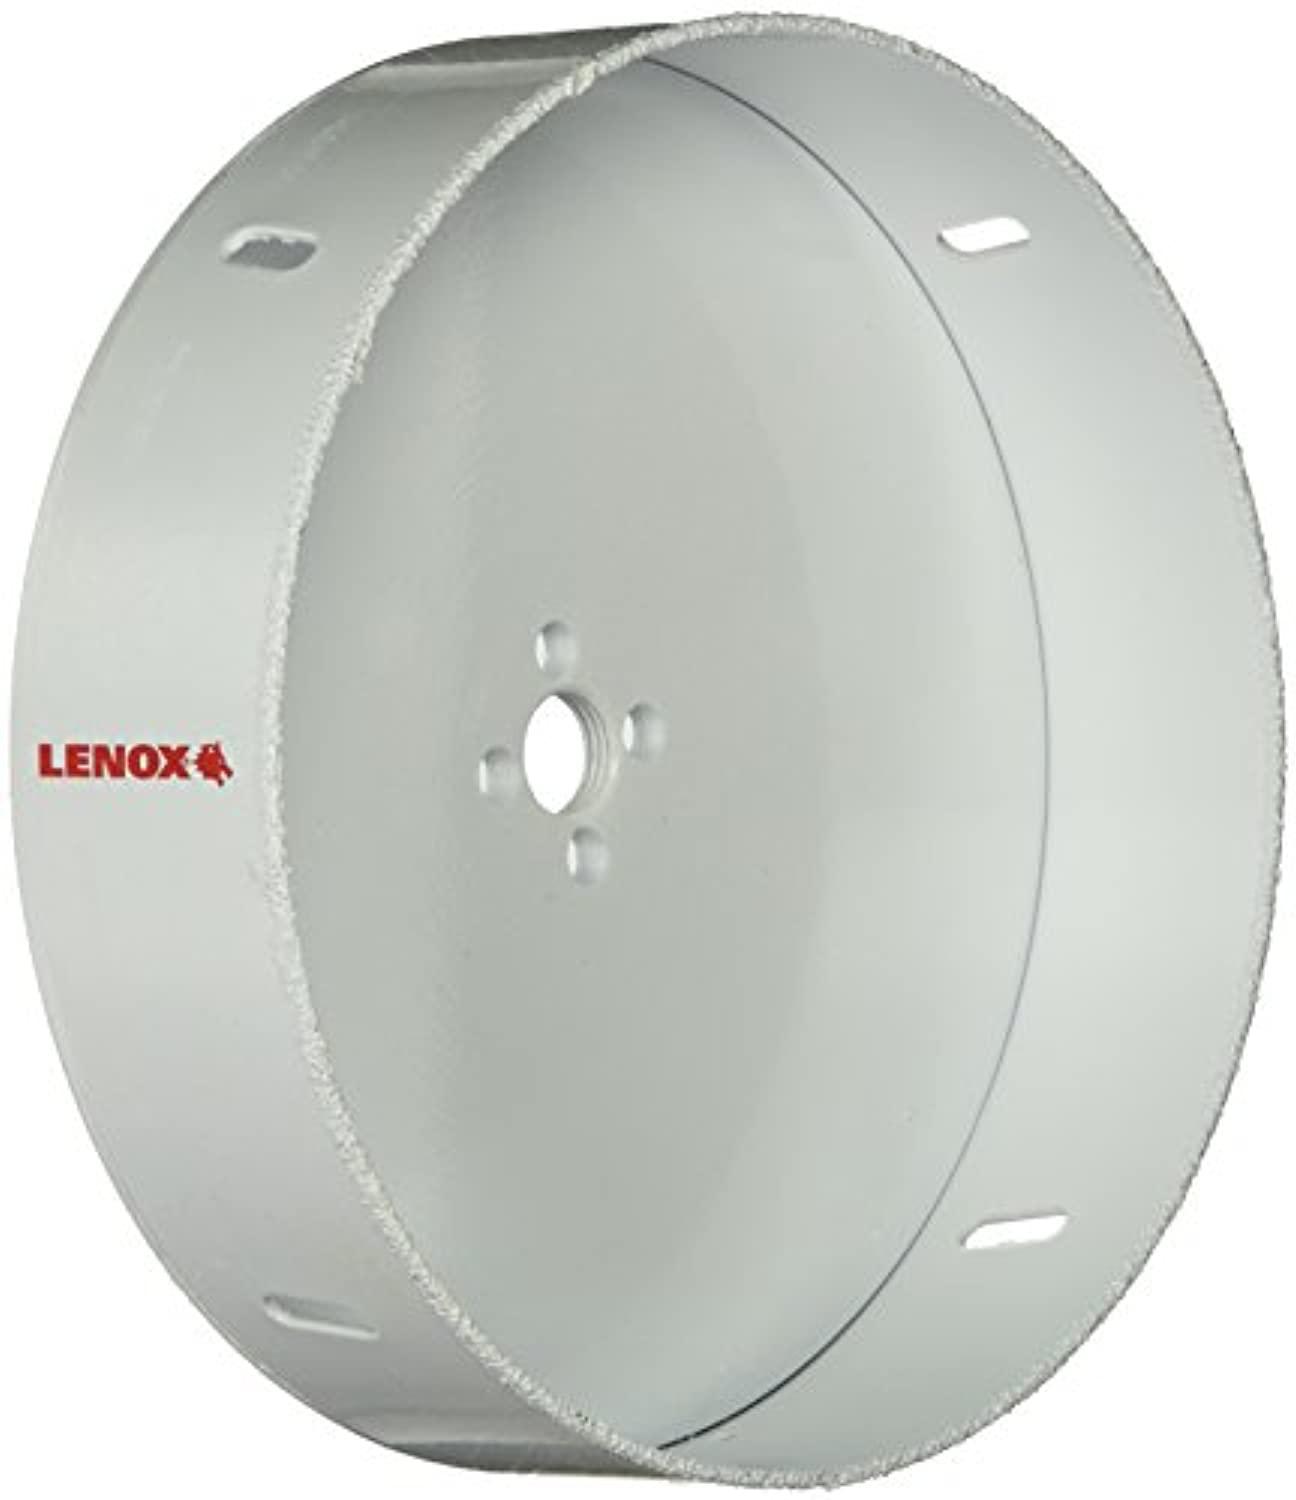 lenox tools hole saw, carbide grit, recessed lighting, 6-7/8-inch (30864678rl)